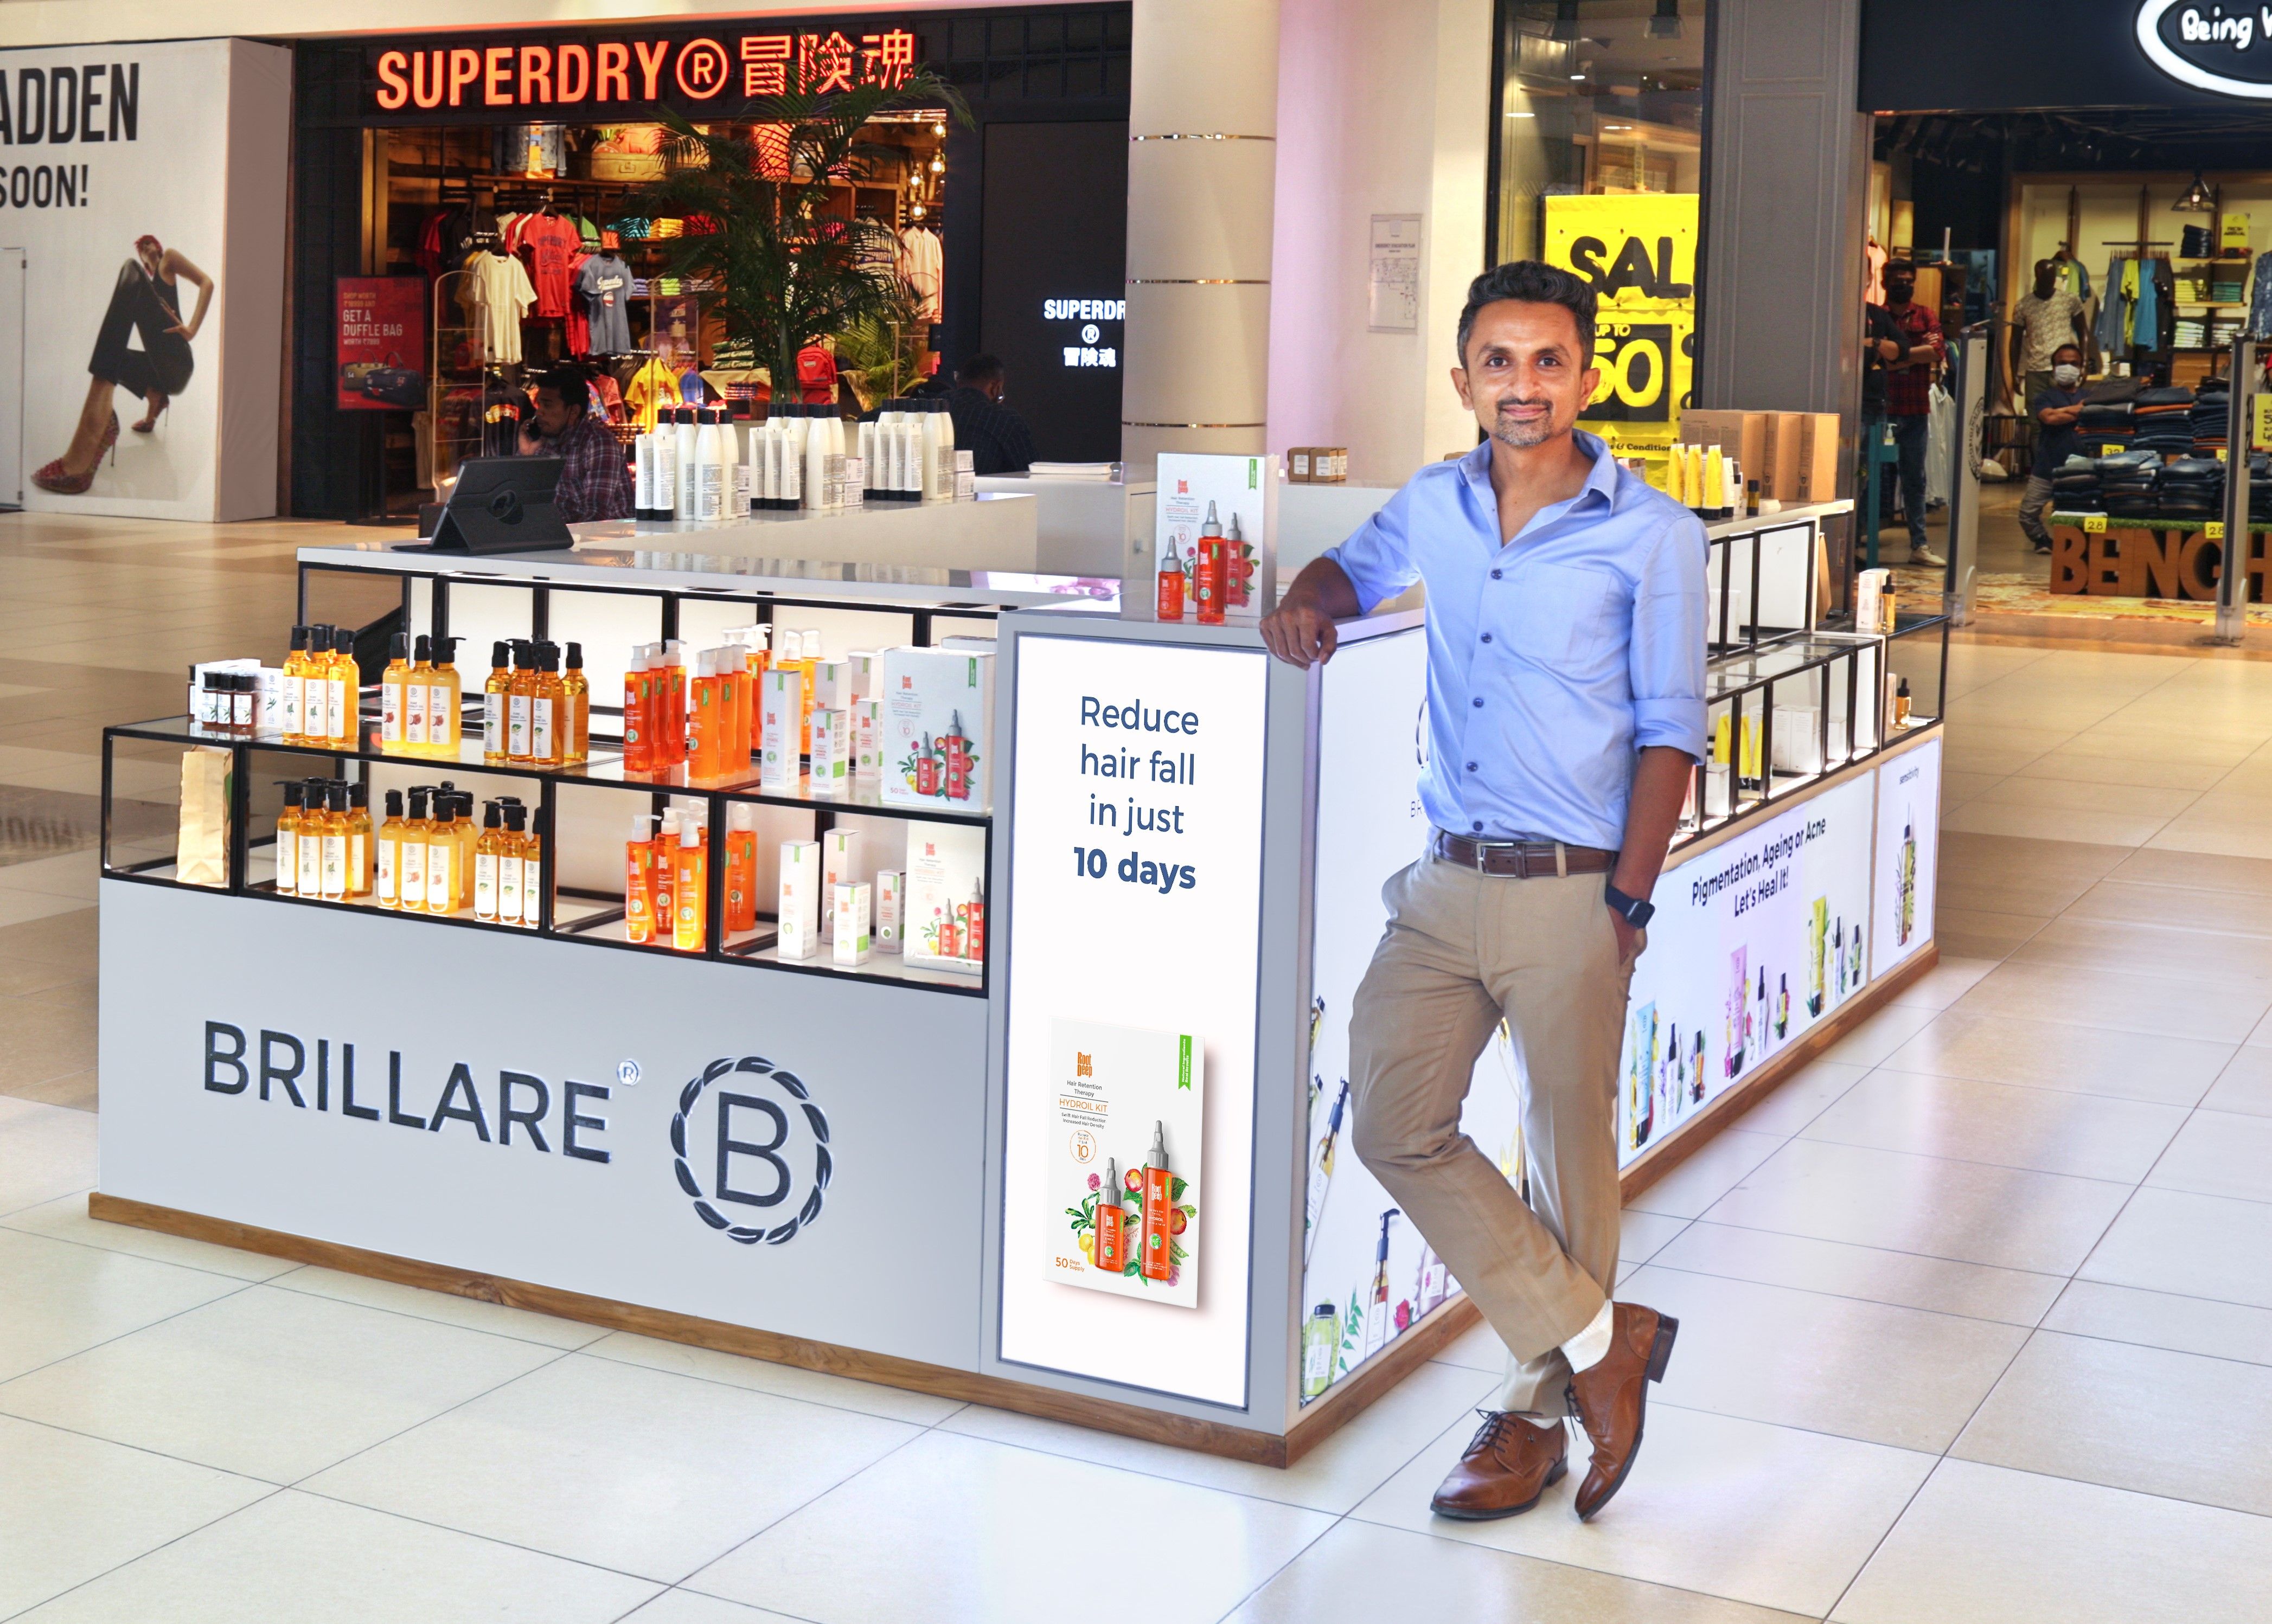 From formulating medicines to treatment shampoos: How this pharmacist built  a prominent personal care brand